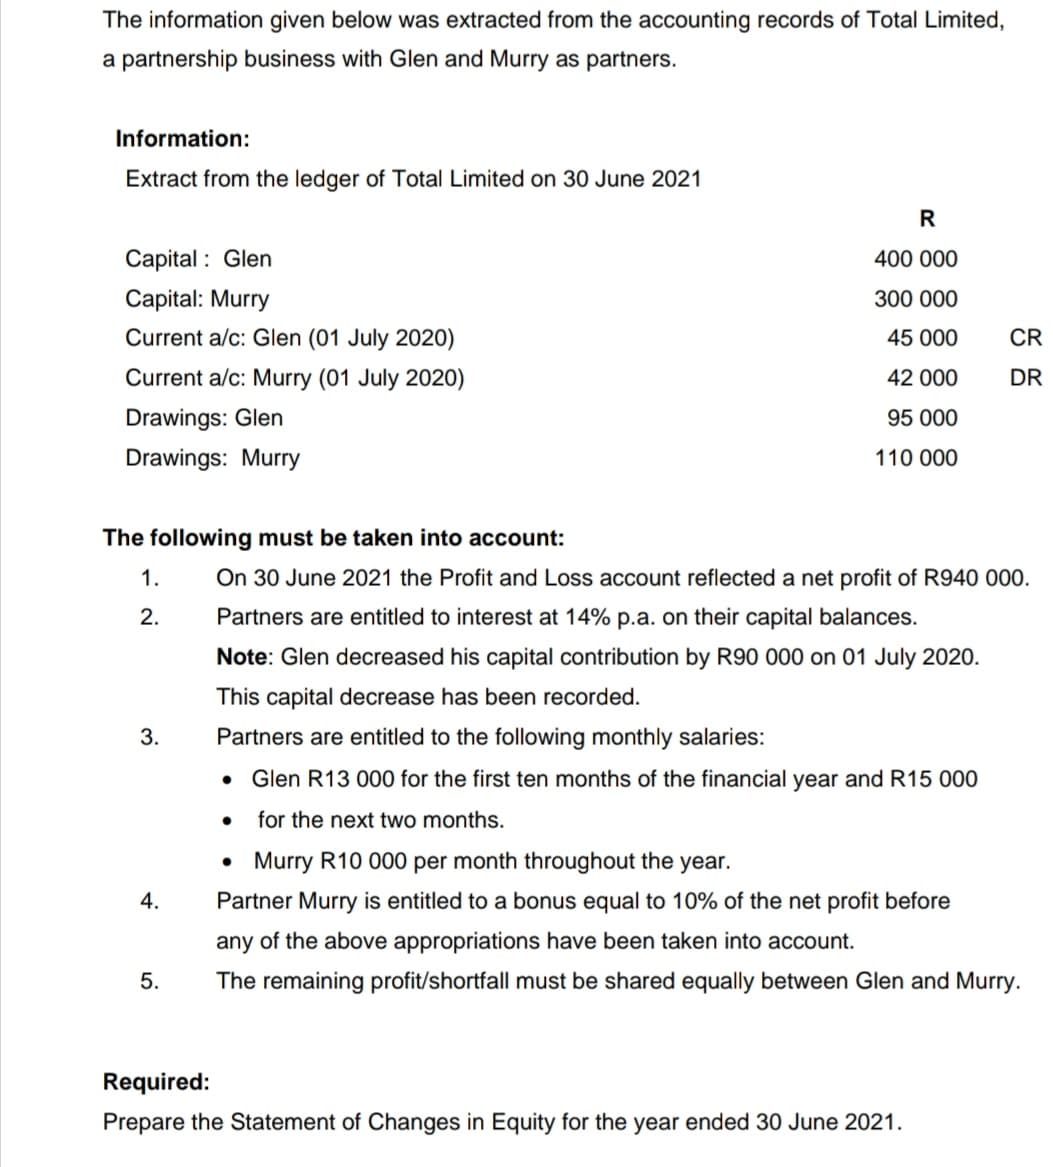 The information given below was extracted from the accounting records of Total Limited,
a partnership business with Glen and Murry as partners.
Information:
Extract from the ledger of Total Limited on 30 June 2021
R
Capital : Glen
400 000
Capital: Murry
300 000
Current a/c: Glen (01 July 2020)
45 000
CR
Current a/c: Murry (01 July 2020)
42 000
DR
Drawings: Glen
95 000
Drawings: Murry
110 000
The following must be taken into account:
1.
On 30 June 2021 the Profit and Loss account reflected a net profit of R940 000.
2.
Partners are entitled to interest at 14% p.a. on their capital balances.
Note: Glen decreased his capital contribution by R90 000 on 01 July 2020.
This capital decrease has been recorded.
3.
Partners are entitled to the following monthly salaries:
Glen R13 000 for the first ten months of the financial year and R15 000
for the next two months.
• Murry R10 000 per month throughout the year.
4.
Partner Murry is entitled to a bonus equal to 10% of the net profit before
any of the above appropriations have been taken into account.
5.
The remaining profit/shortfall must be shared equally between Glen and Murry.
Required:
Prepare the Statement of Changes in Equity for the year ended 30 June 2021.
